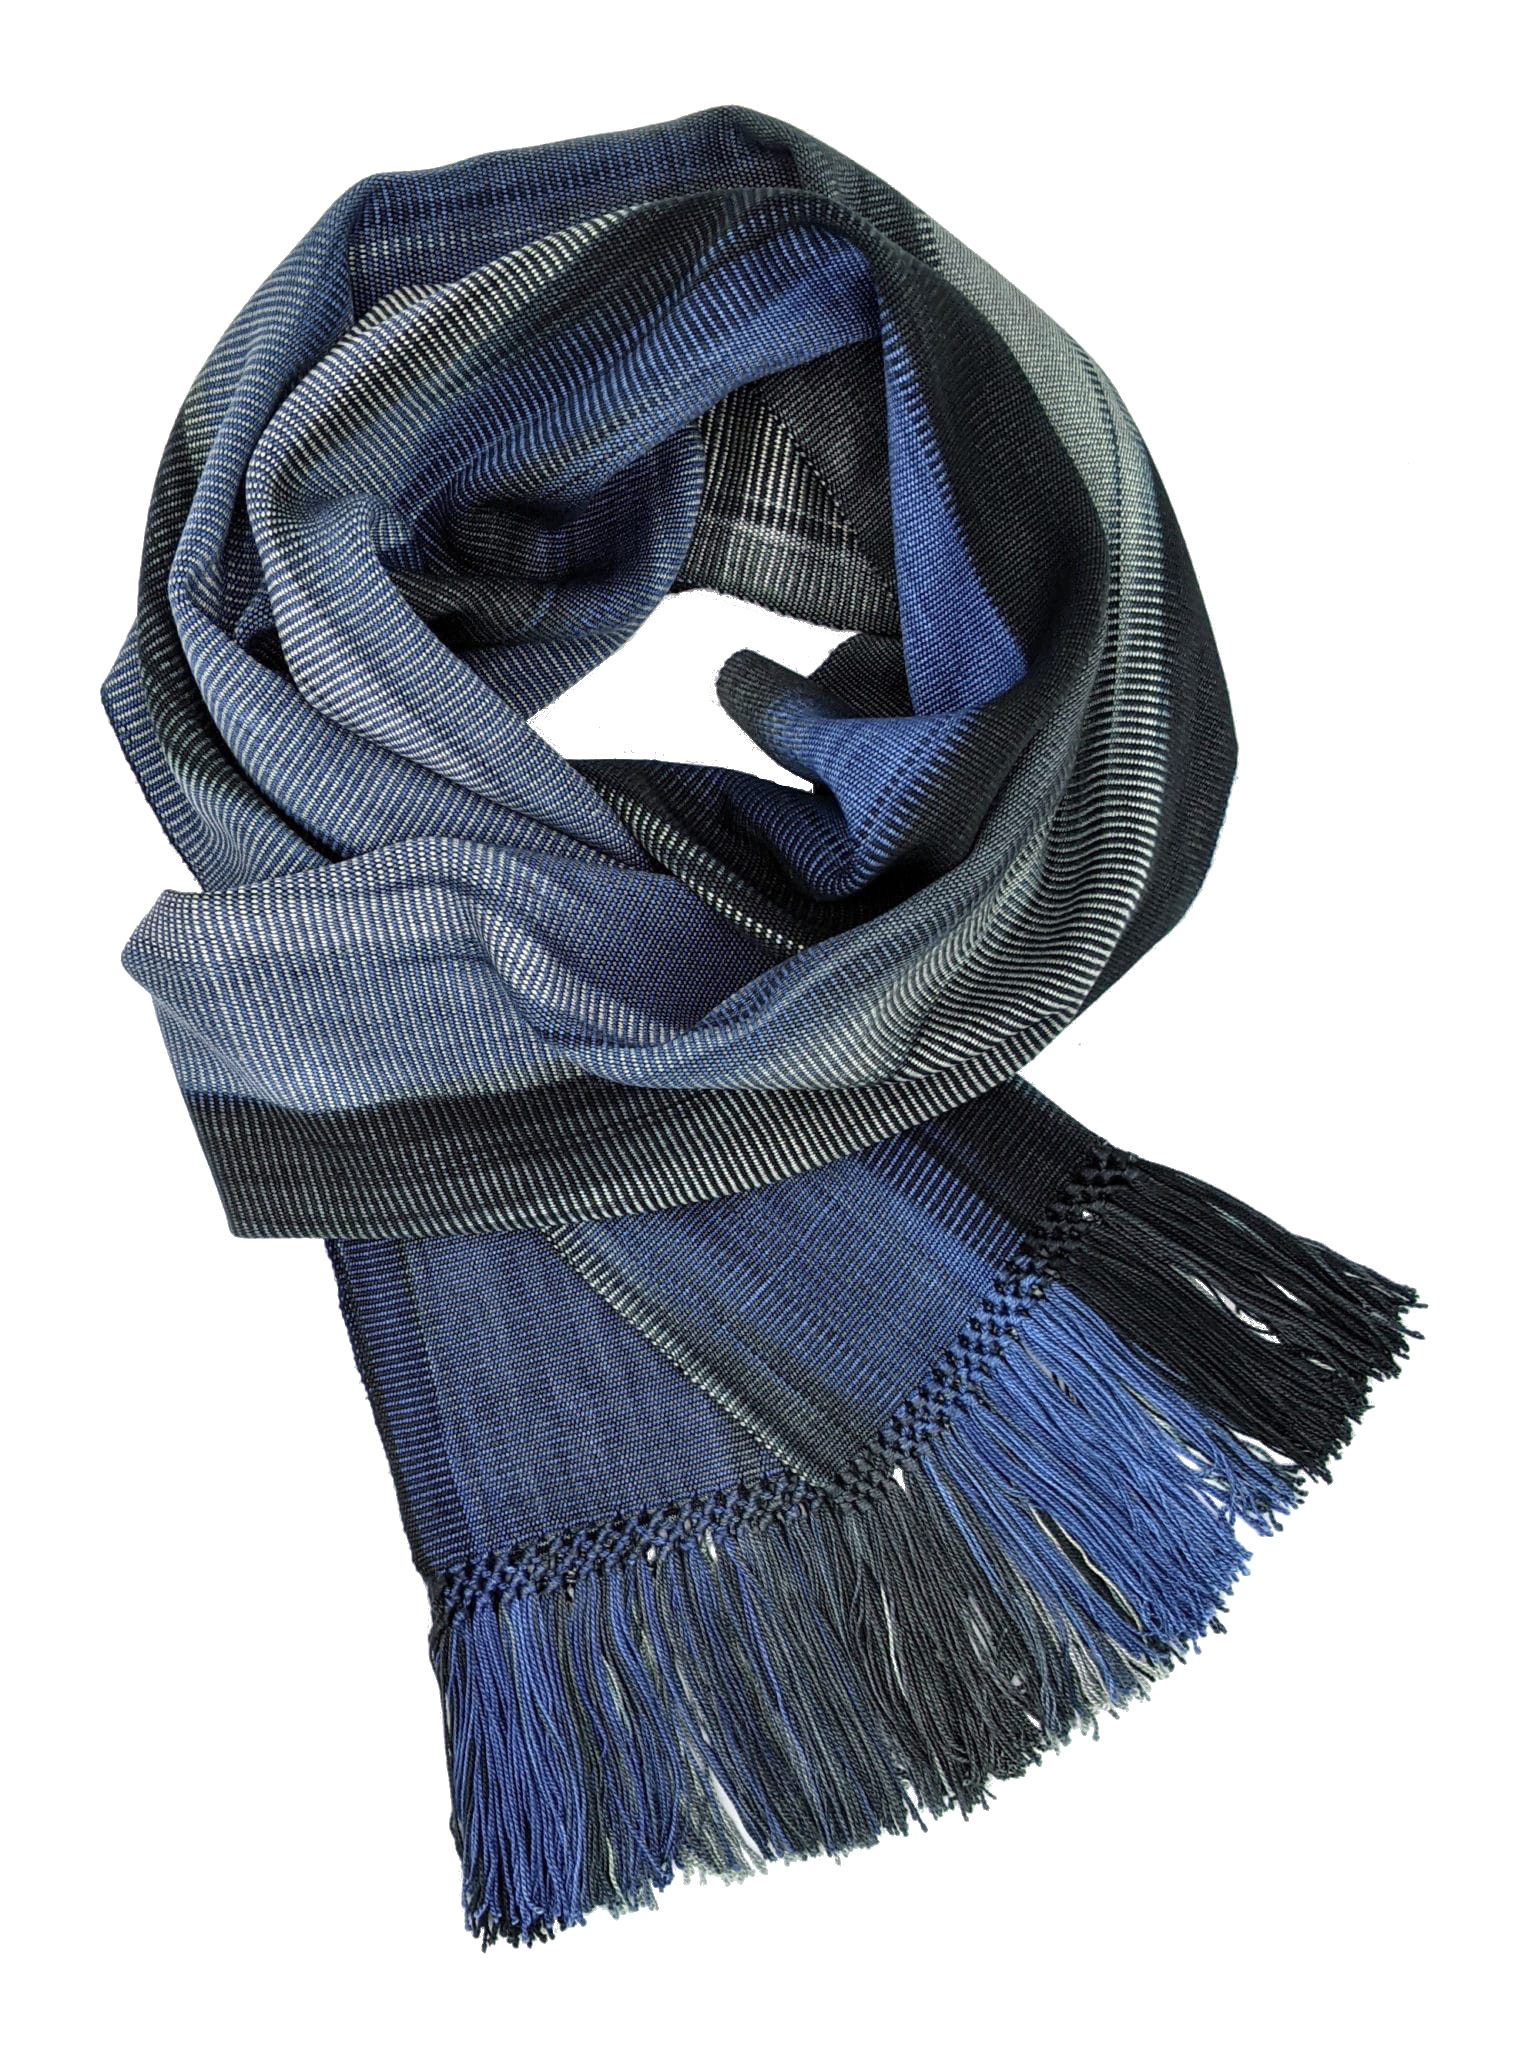 Blue, Grays and Black Lightweight Bamboo Handwoven Scarf 8 x 68